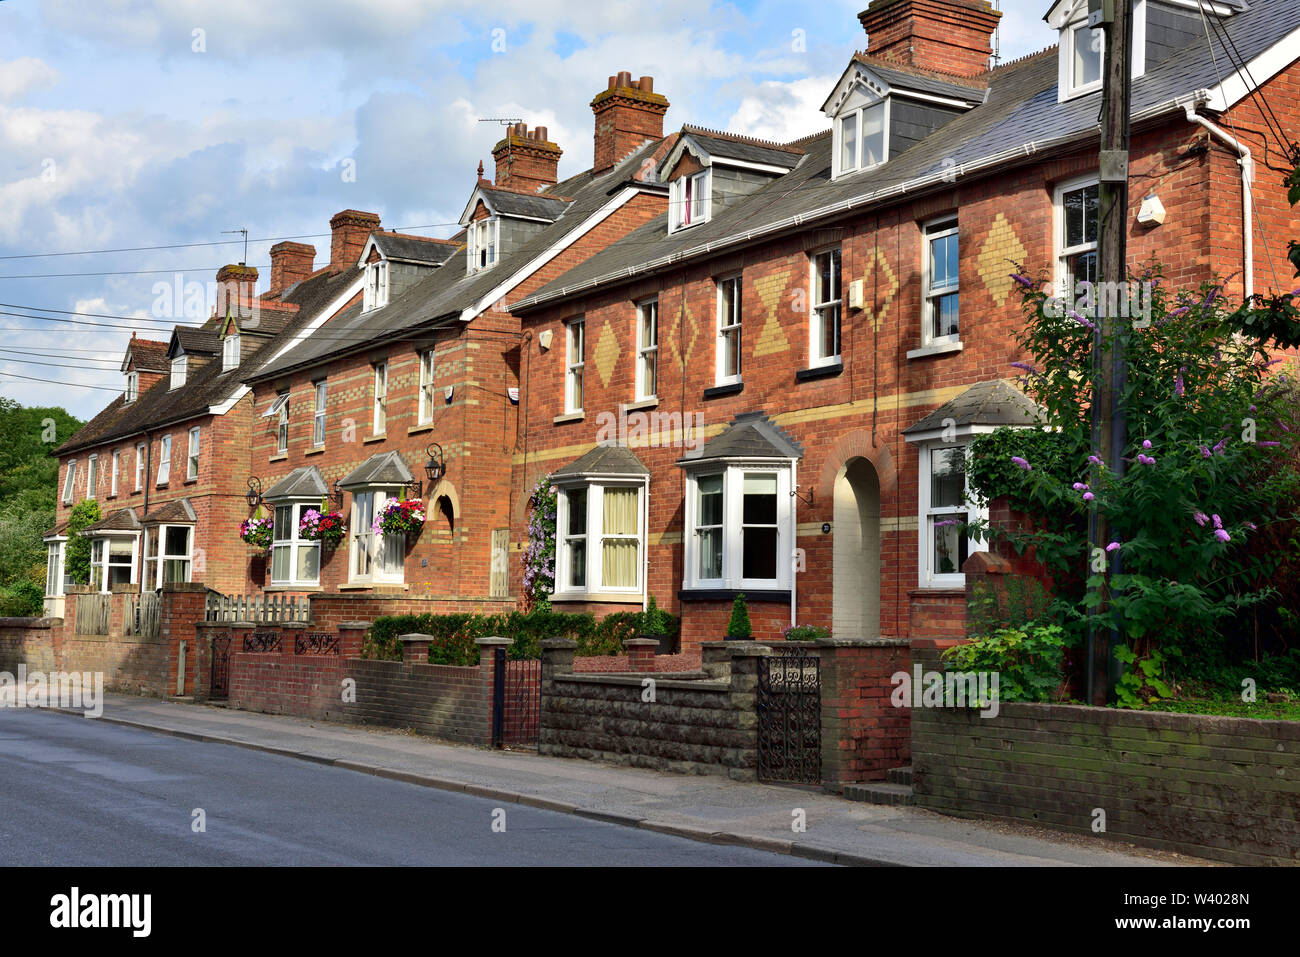 Terrace of Victorian brick built house in market town of Wantage ...